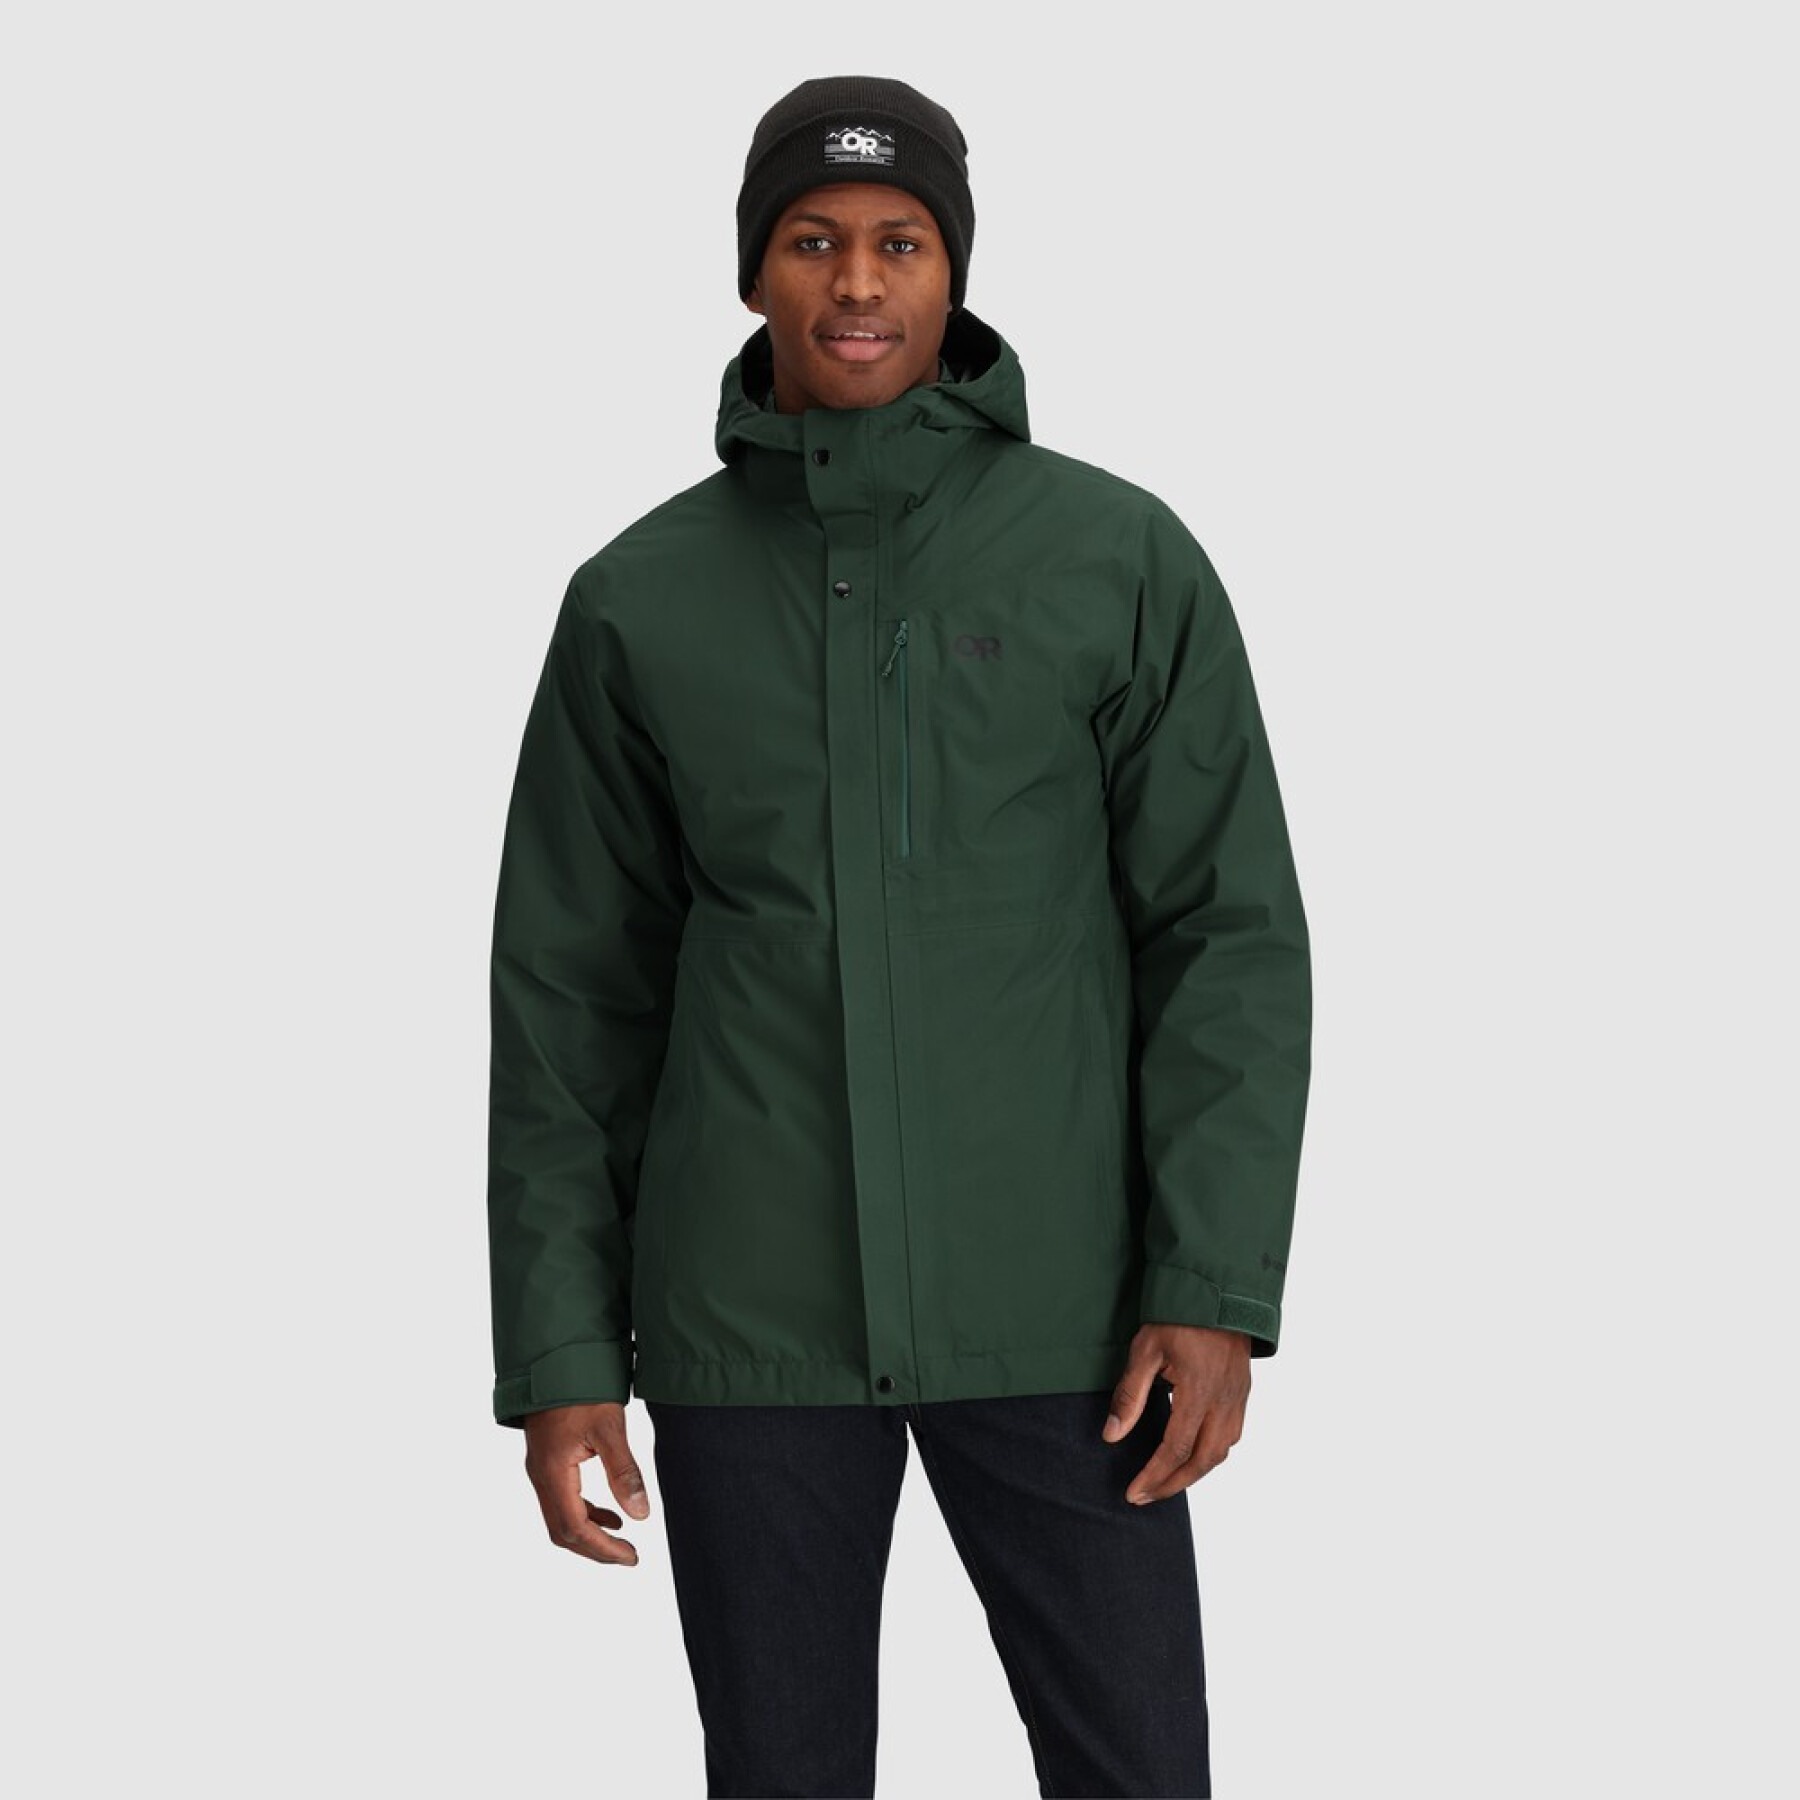 Chaqueta impermeable 3 en 1 Outdoor Research Foray